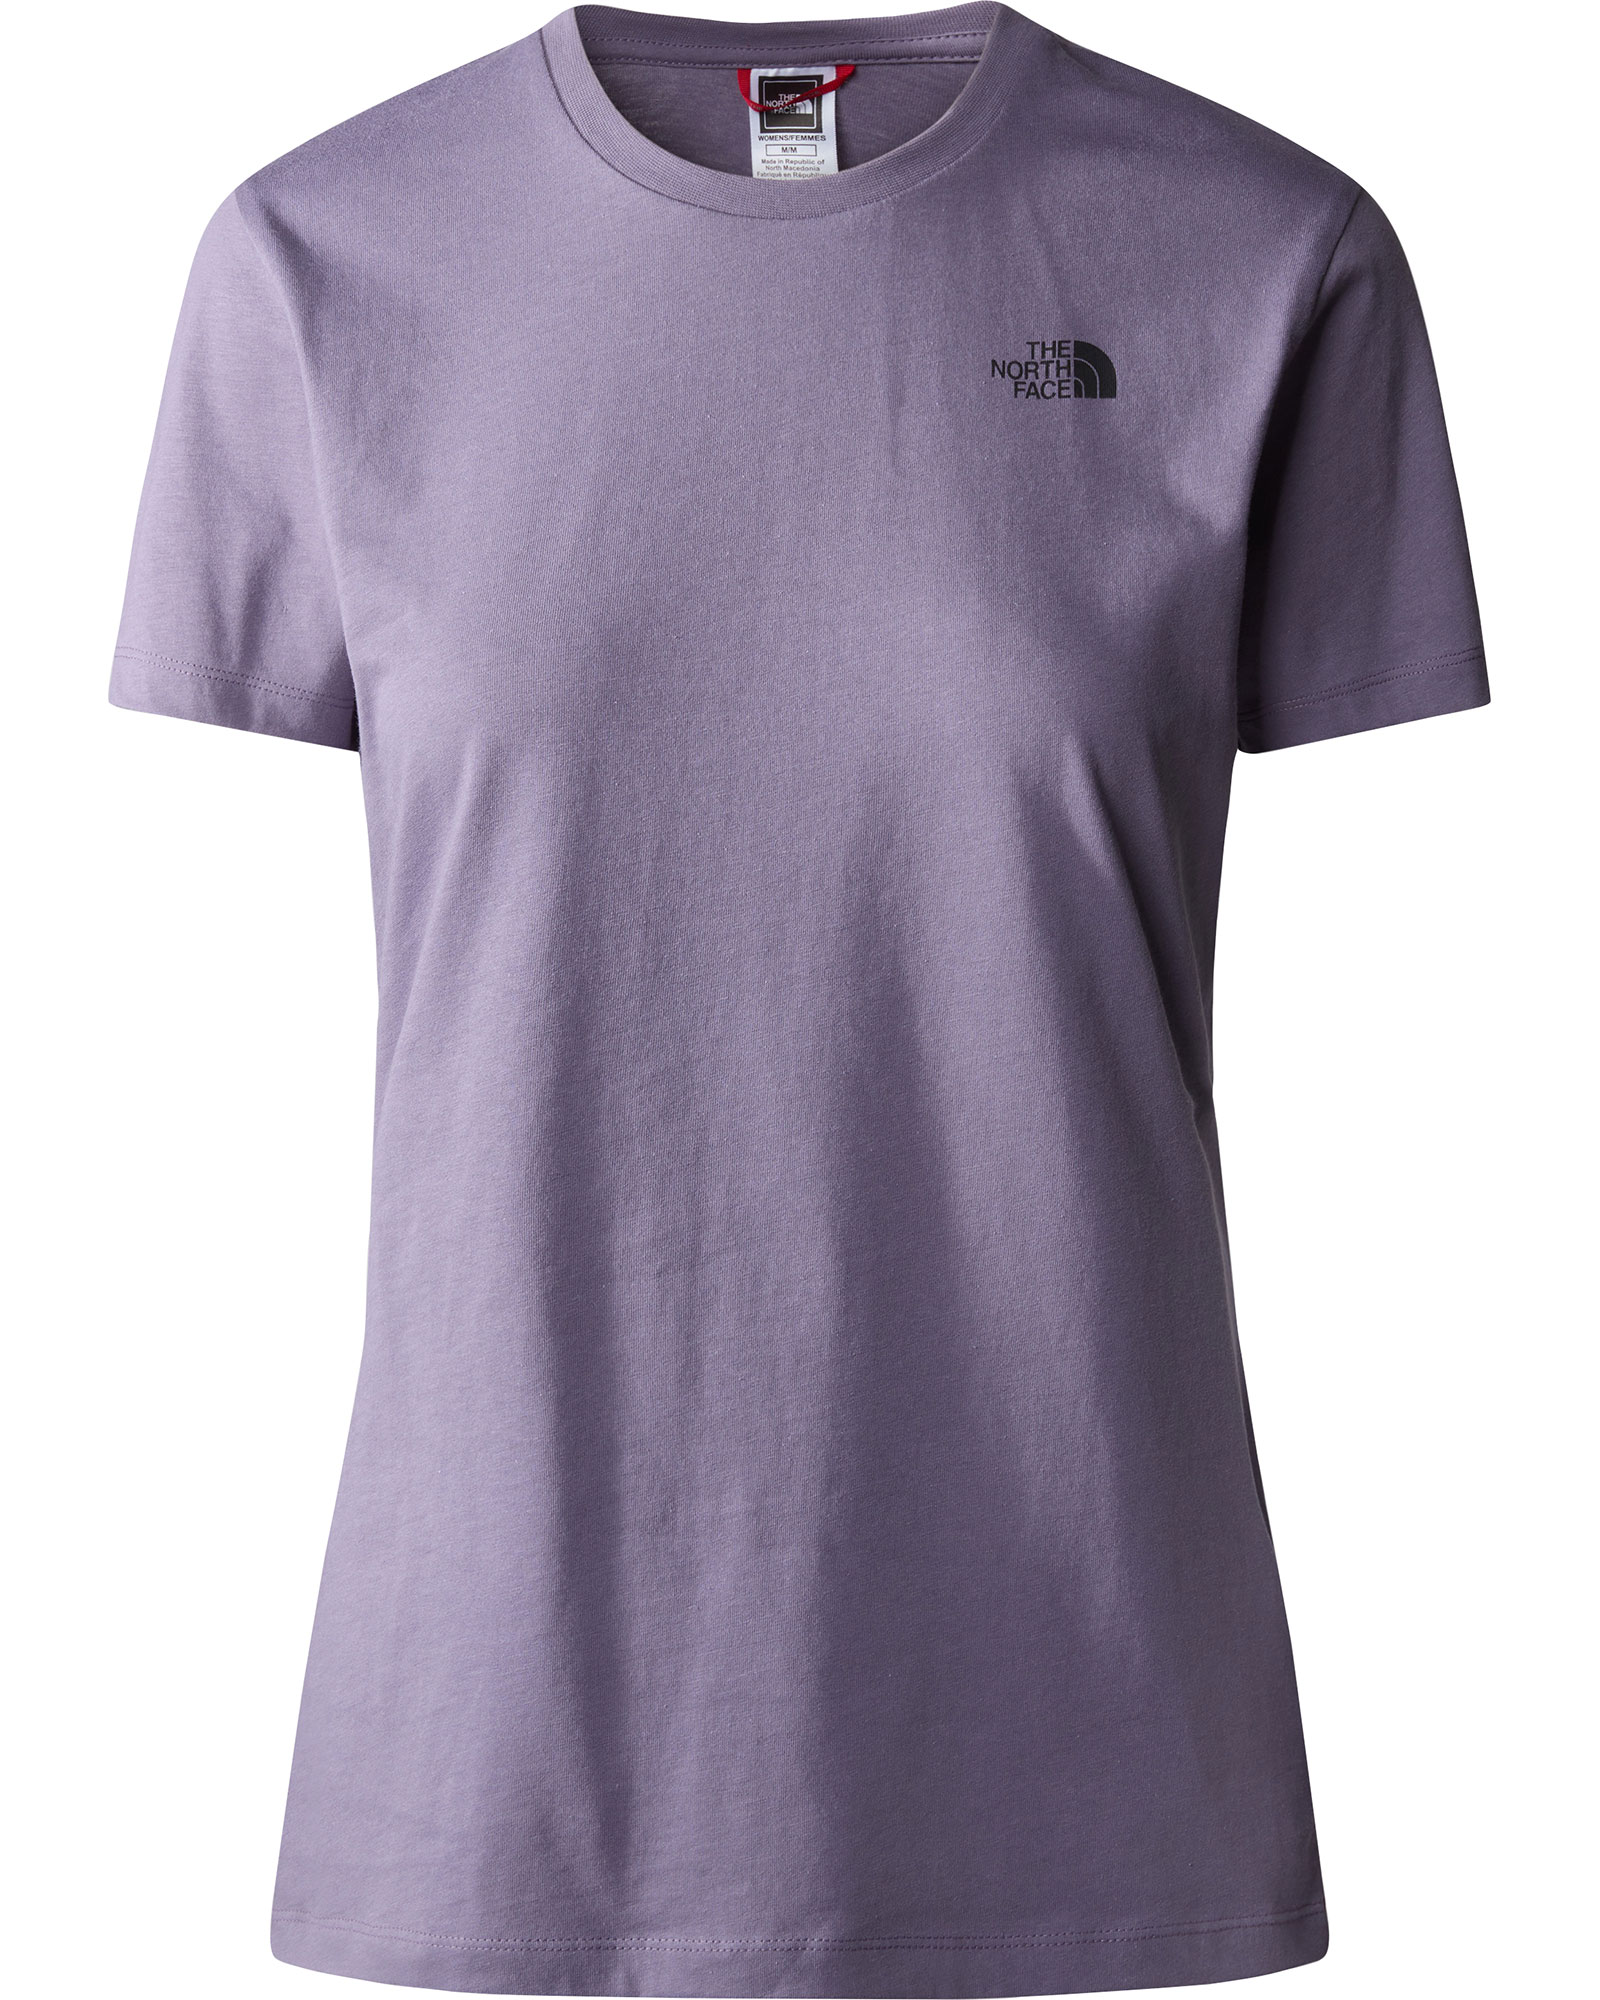 The North Face Simple Dome Women’s T Shirt - Lunar Slate L